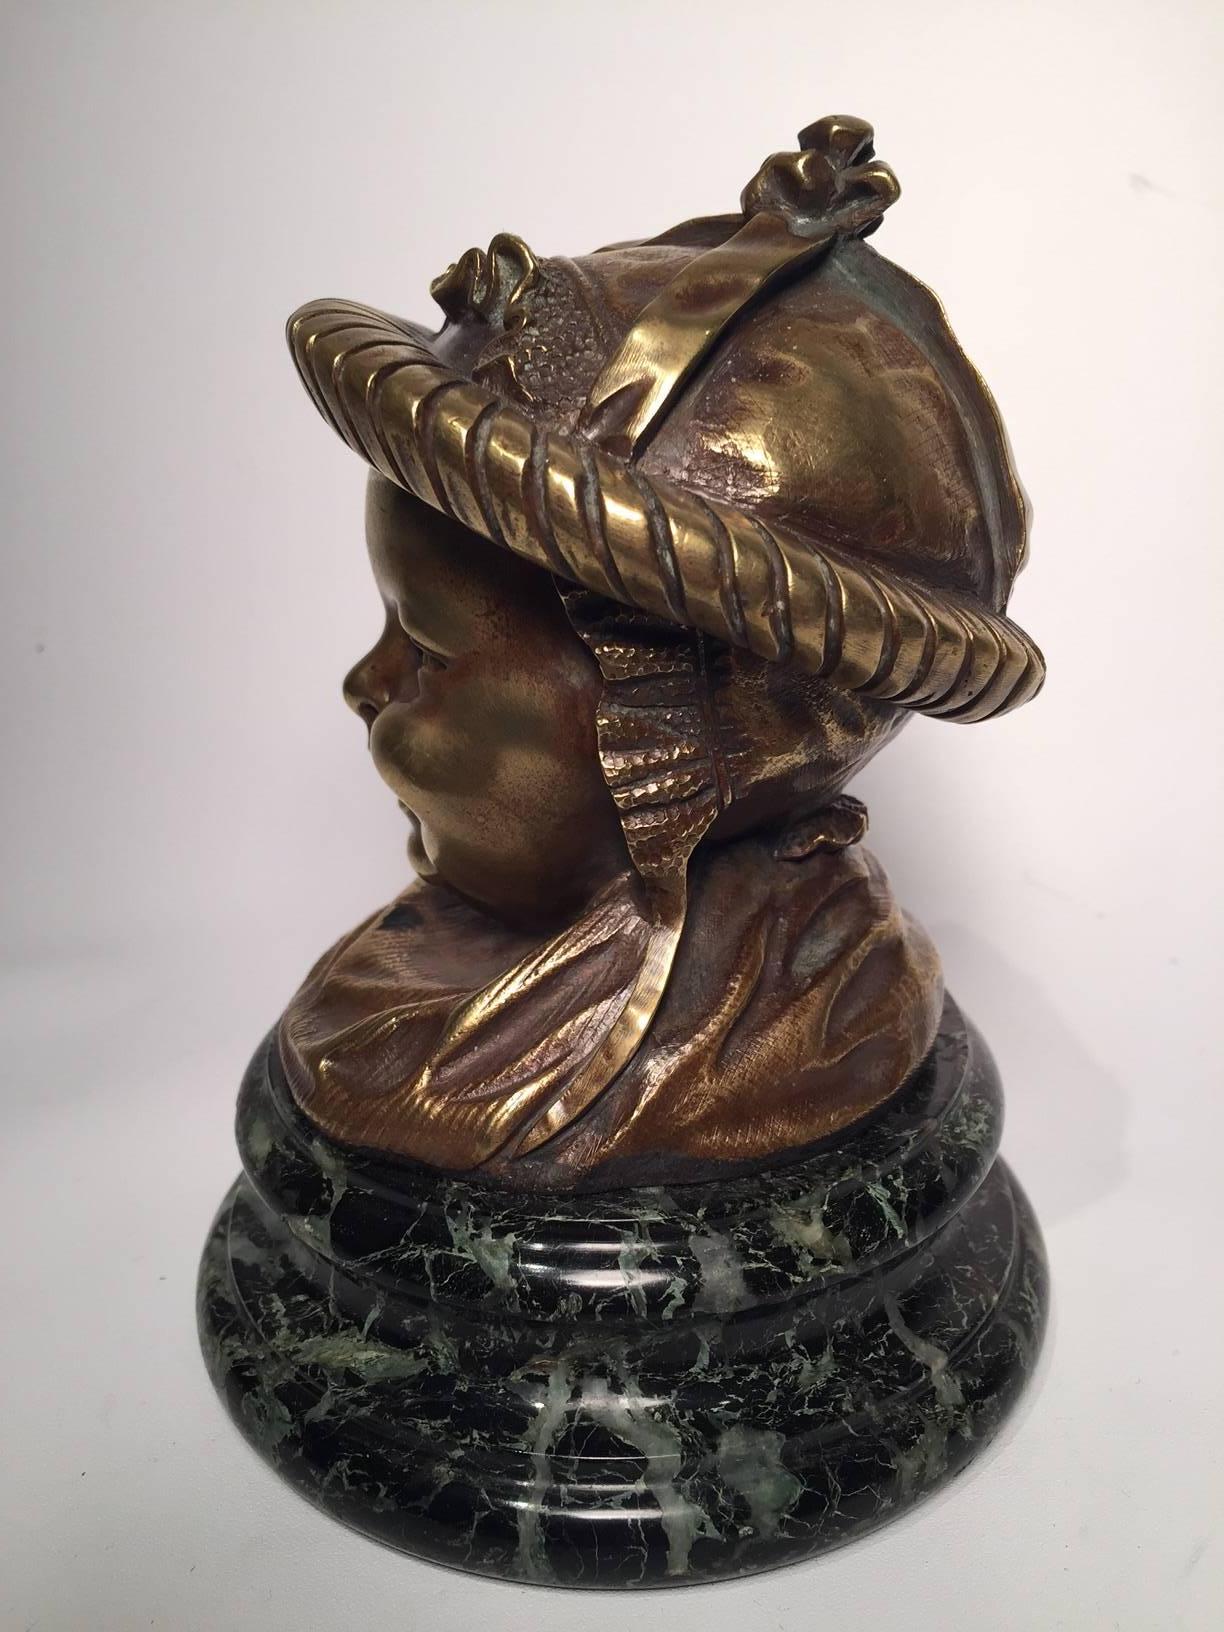 19th Century French Bronze Inkwell of a Baby on a turned green variegated marble base. This charming bronze was probably cast in the late 19th century when Orientalism was very much in vogue as the ribboned baby's bonnet seems to be inspired by East